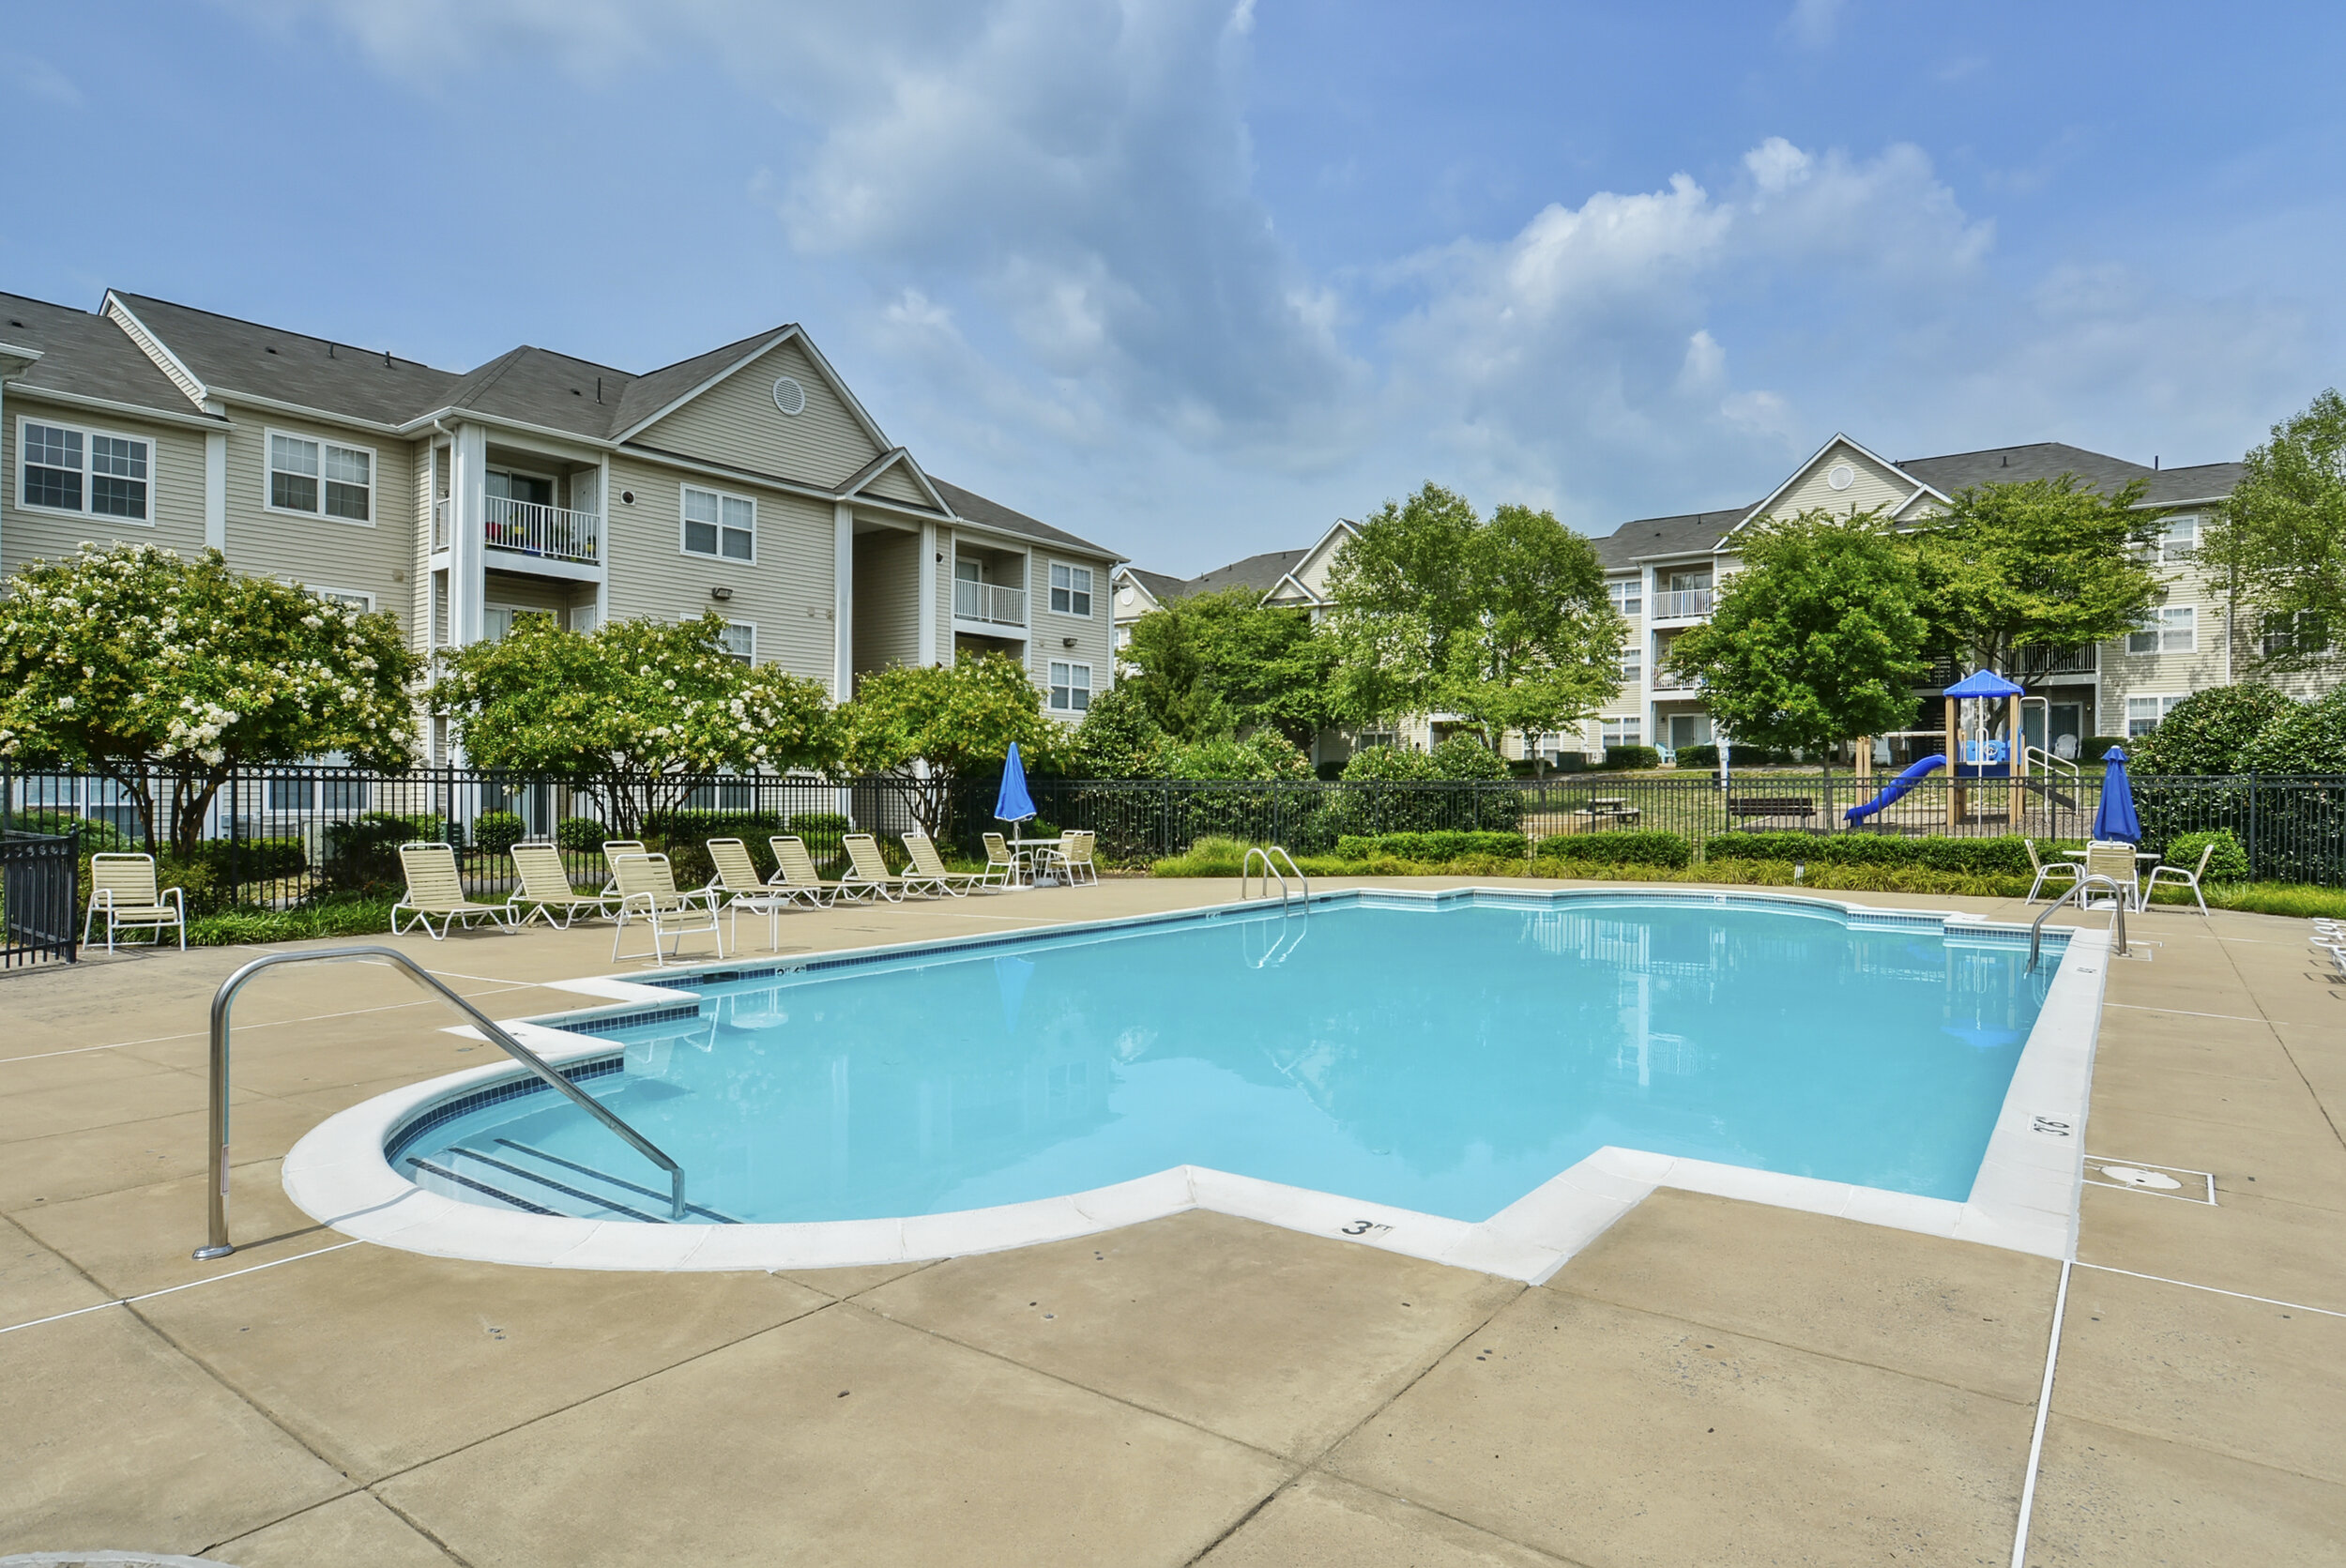  The resort-style pool is one of the many community amenities. 